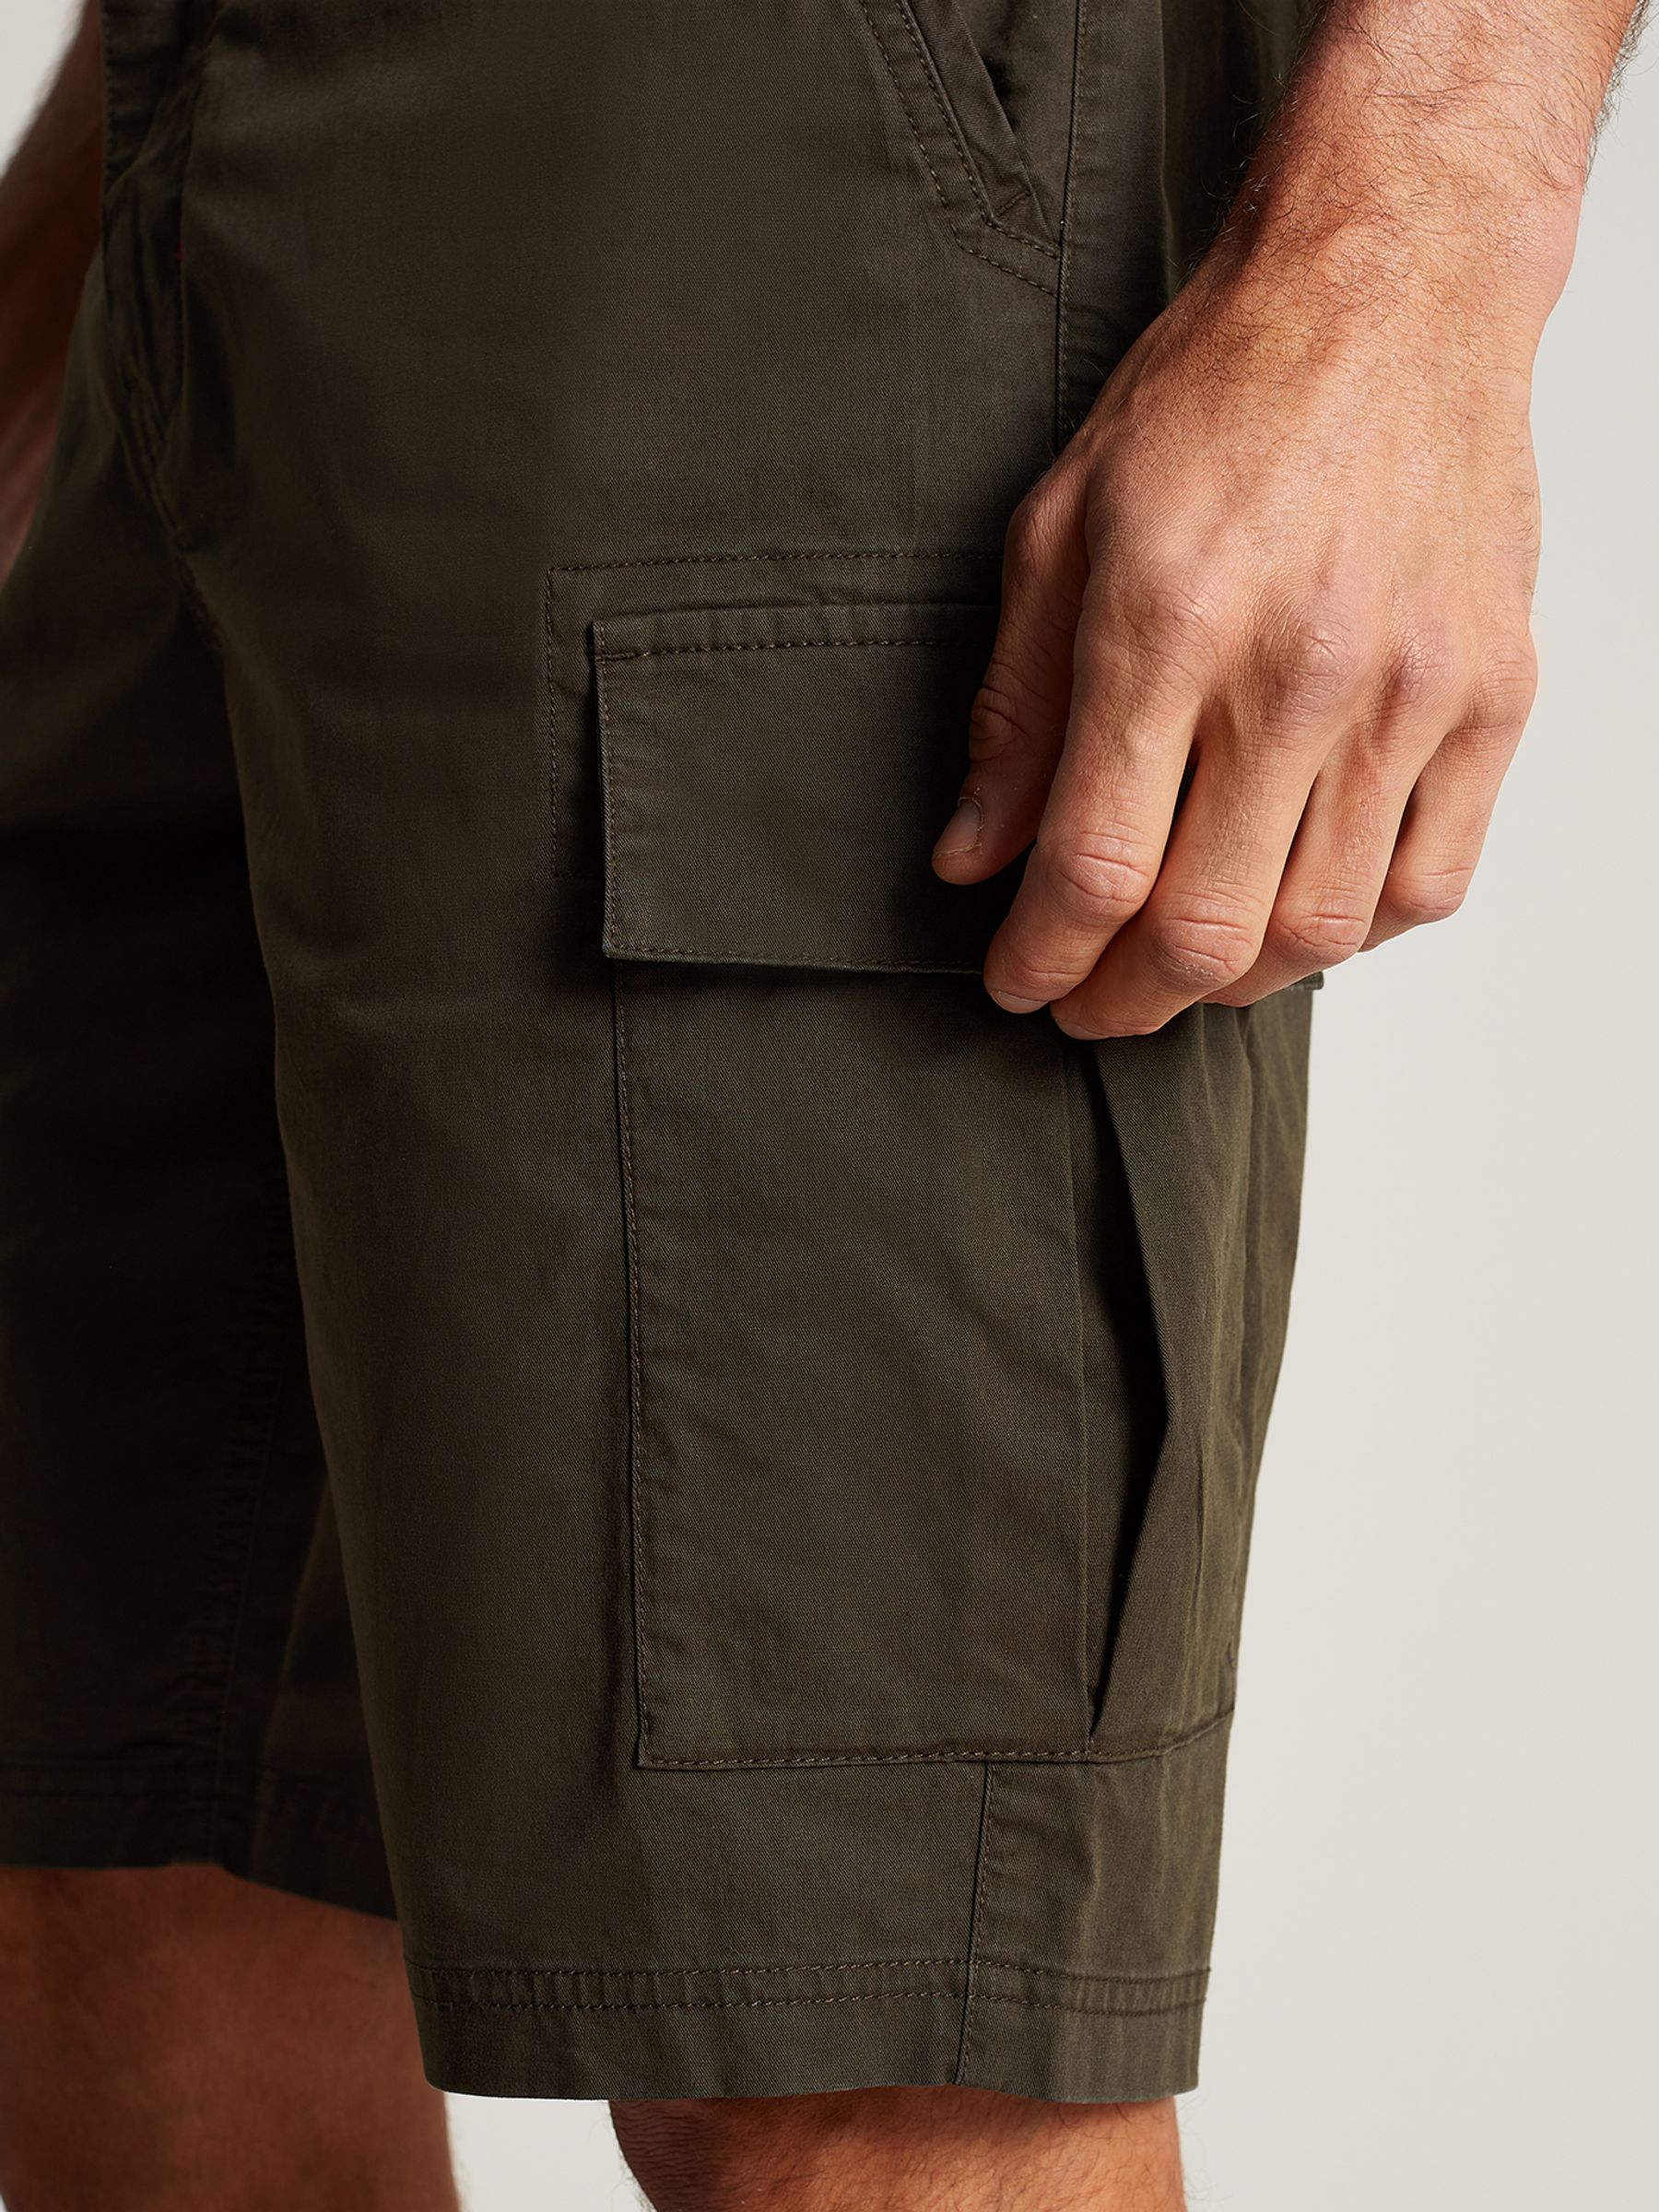 Buy Green Cargo Shorts from the Joules online shop